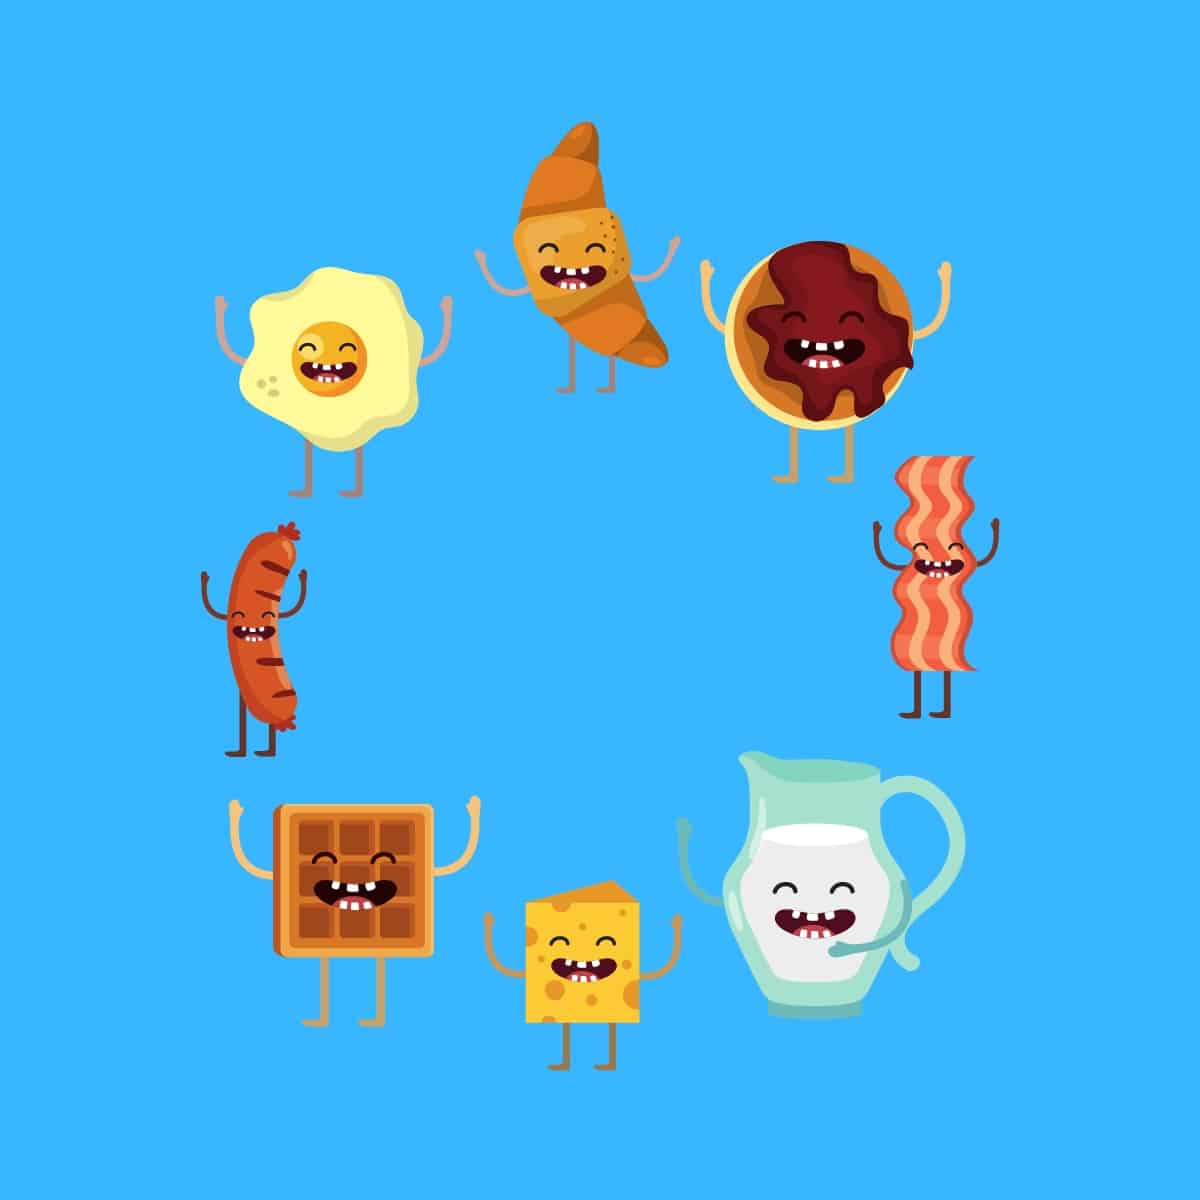 Cartoon graphic of lots of breakfast foods standing in a circle and smiling with eyes closed on a blue background.